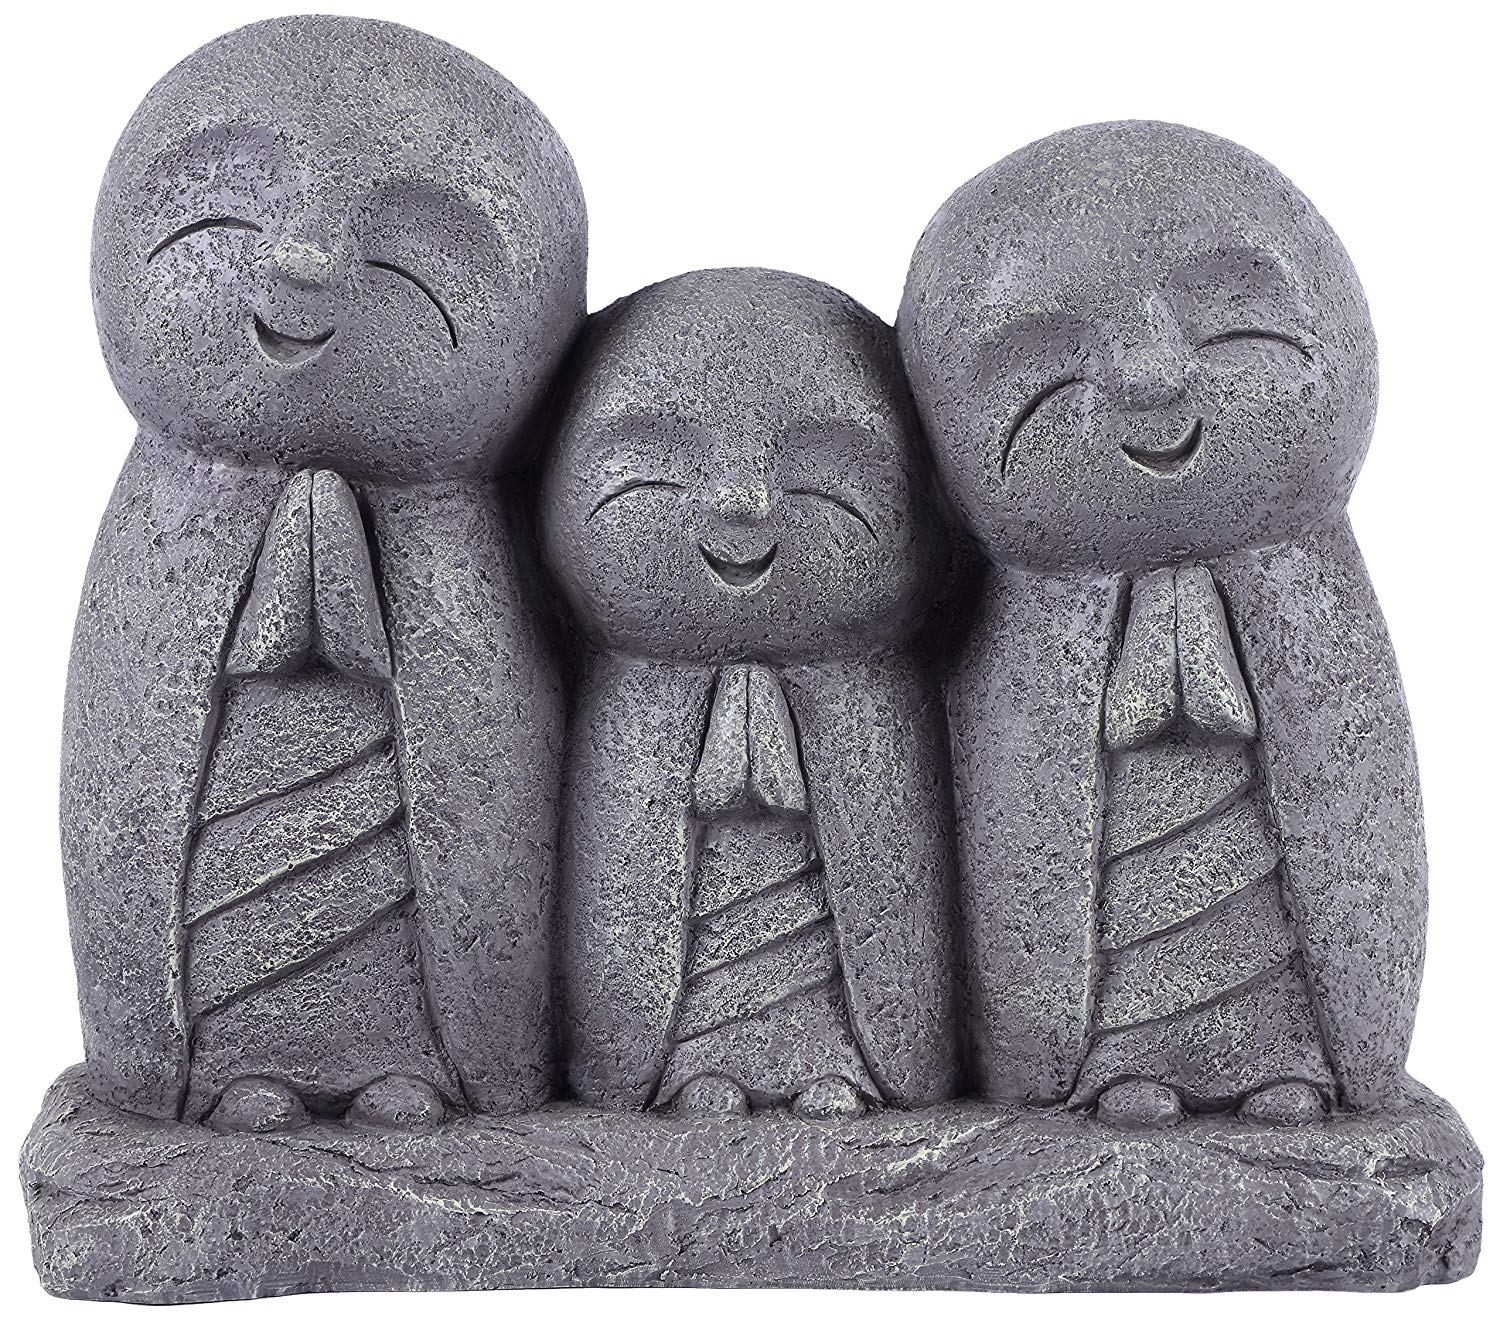 Hi-Line Gift 15-in H x 7-in W Gray Garden Statue at Lowes.com